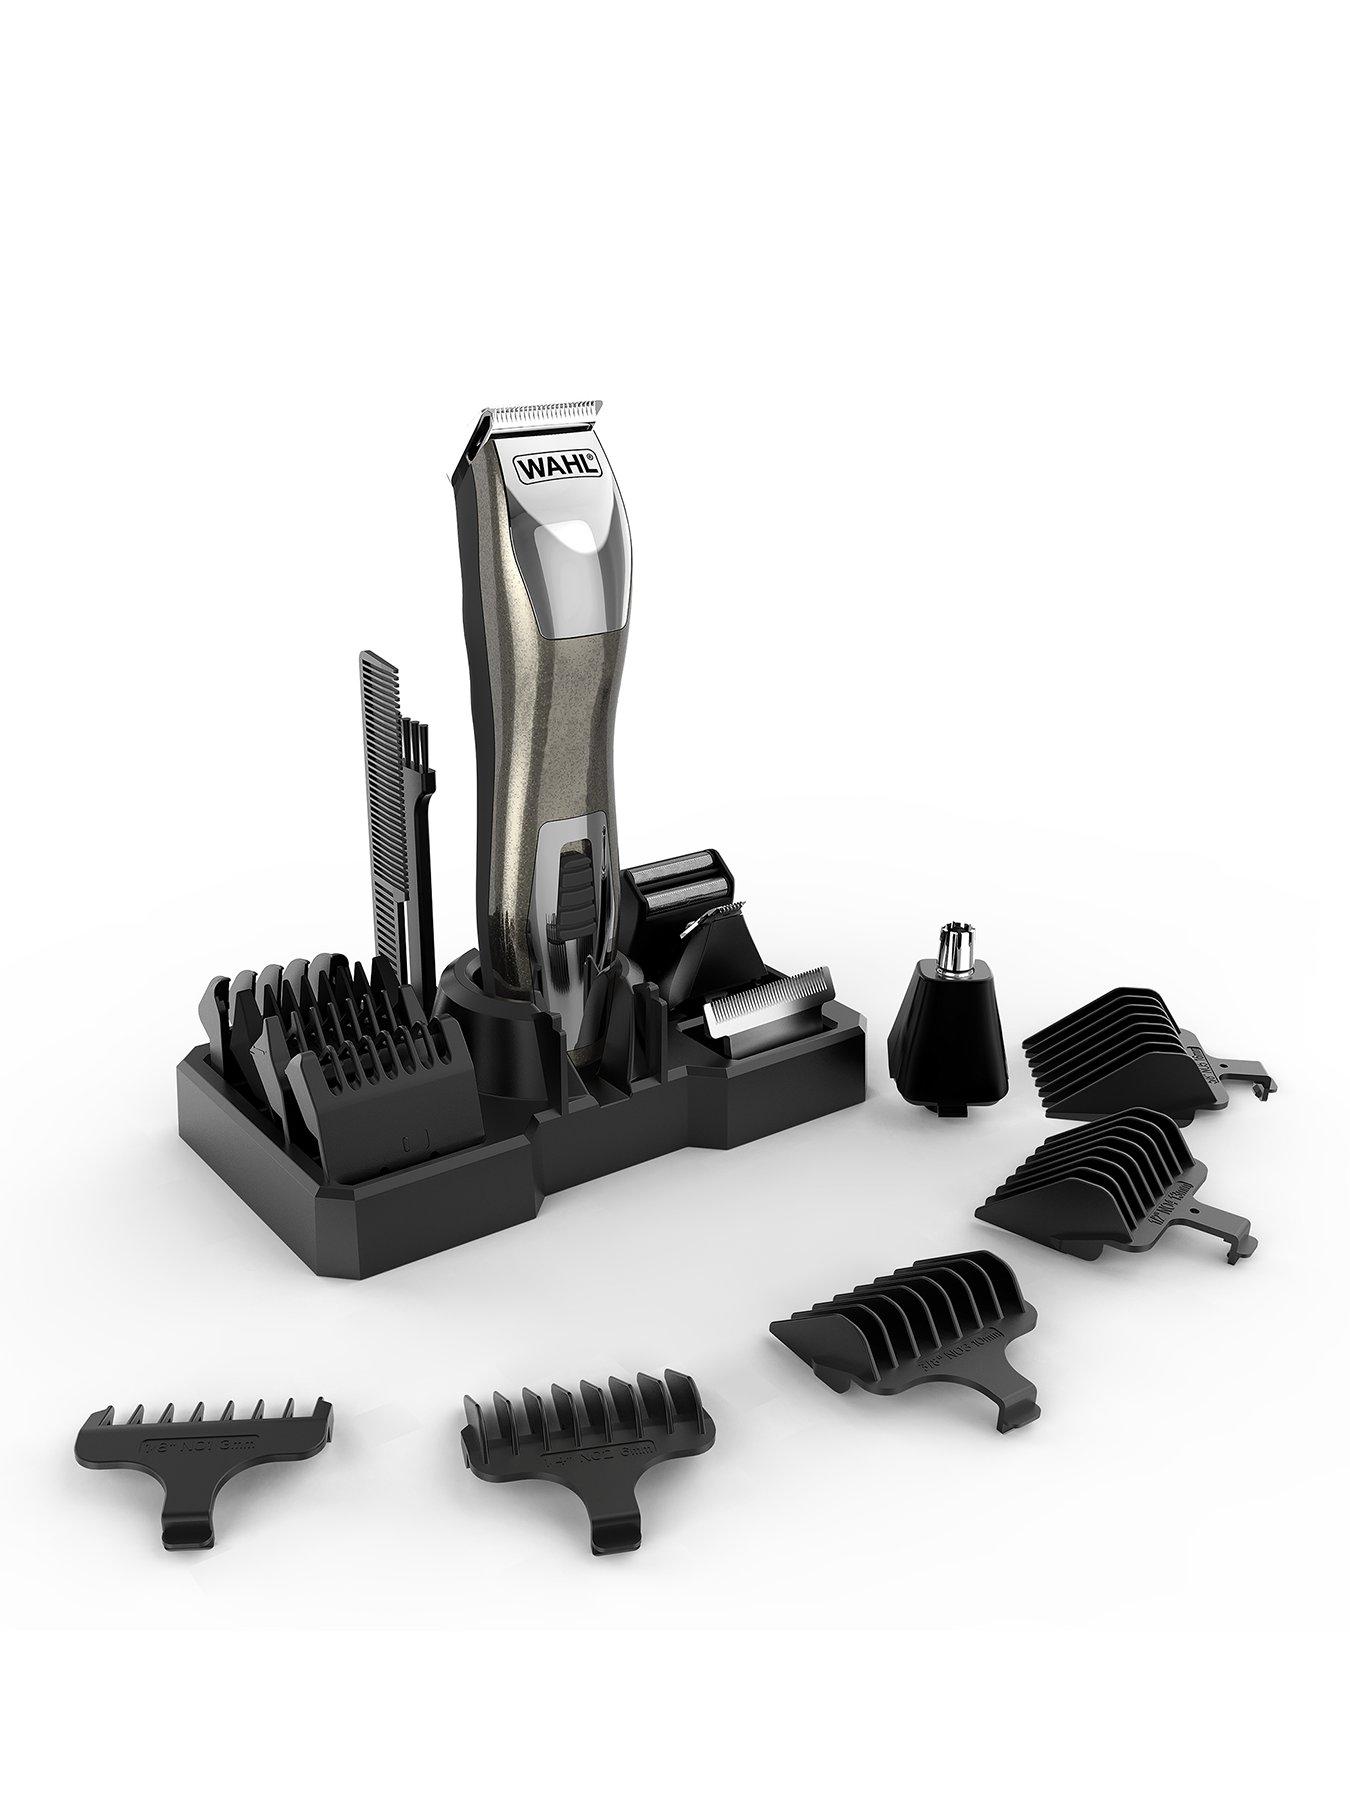 wahl 14 in 1 trimmer